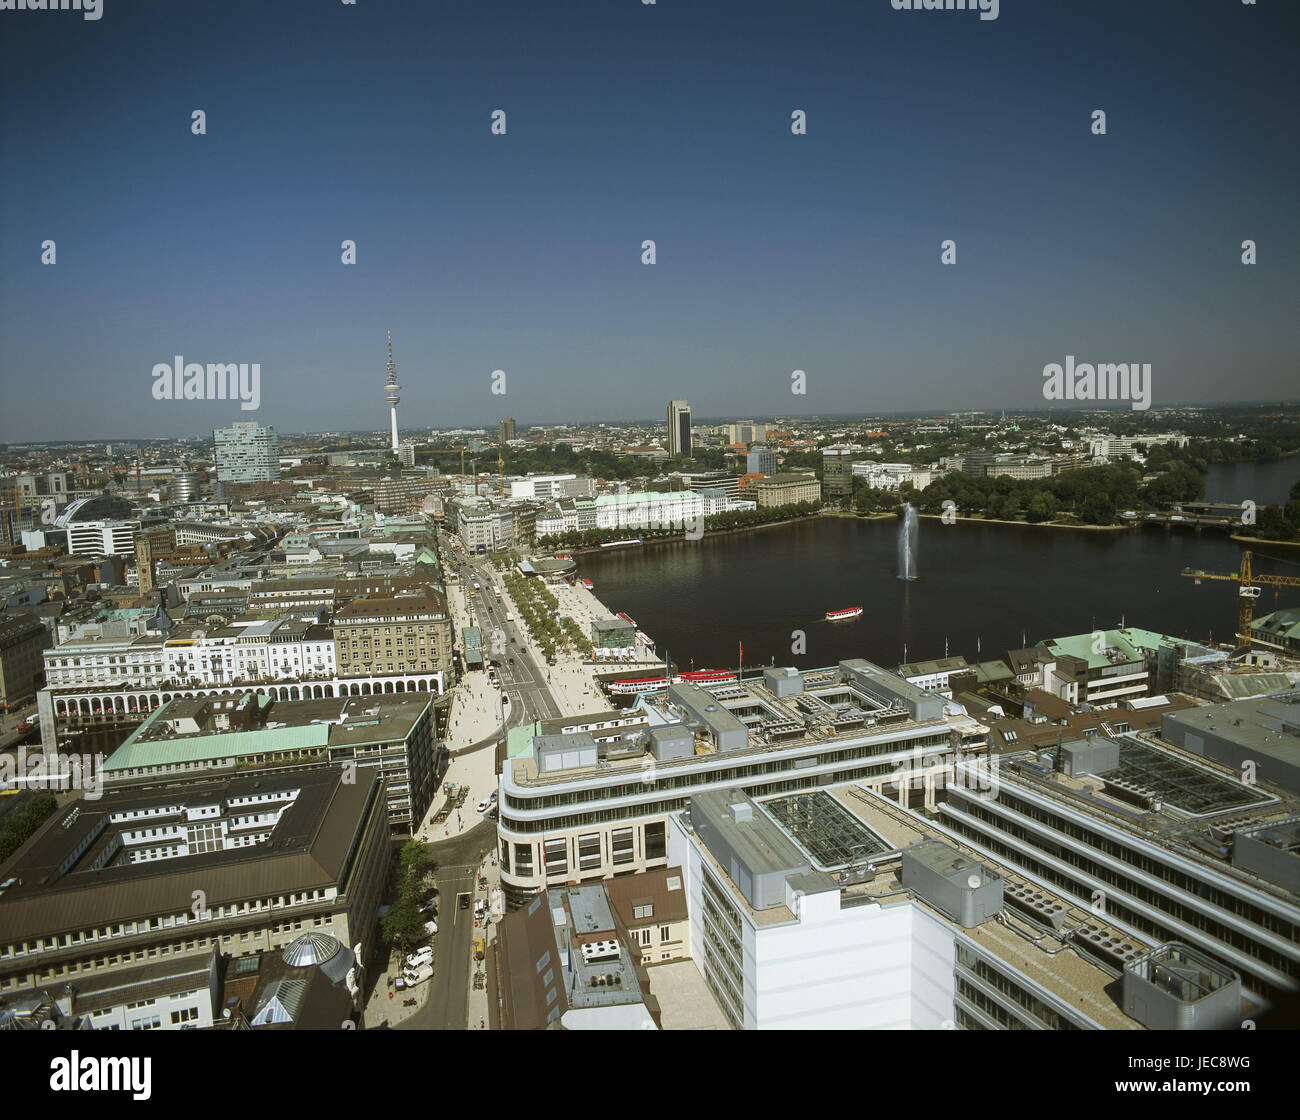 Germany, Hamburg, town overview, Jungfernstieg, the Inner Alster, North Germany, city, Hanseatic town, port, town, city centre, television tower, waters, ship, jet, overview, copy space, Stock Photo